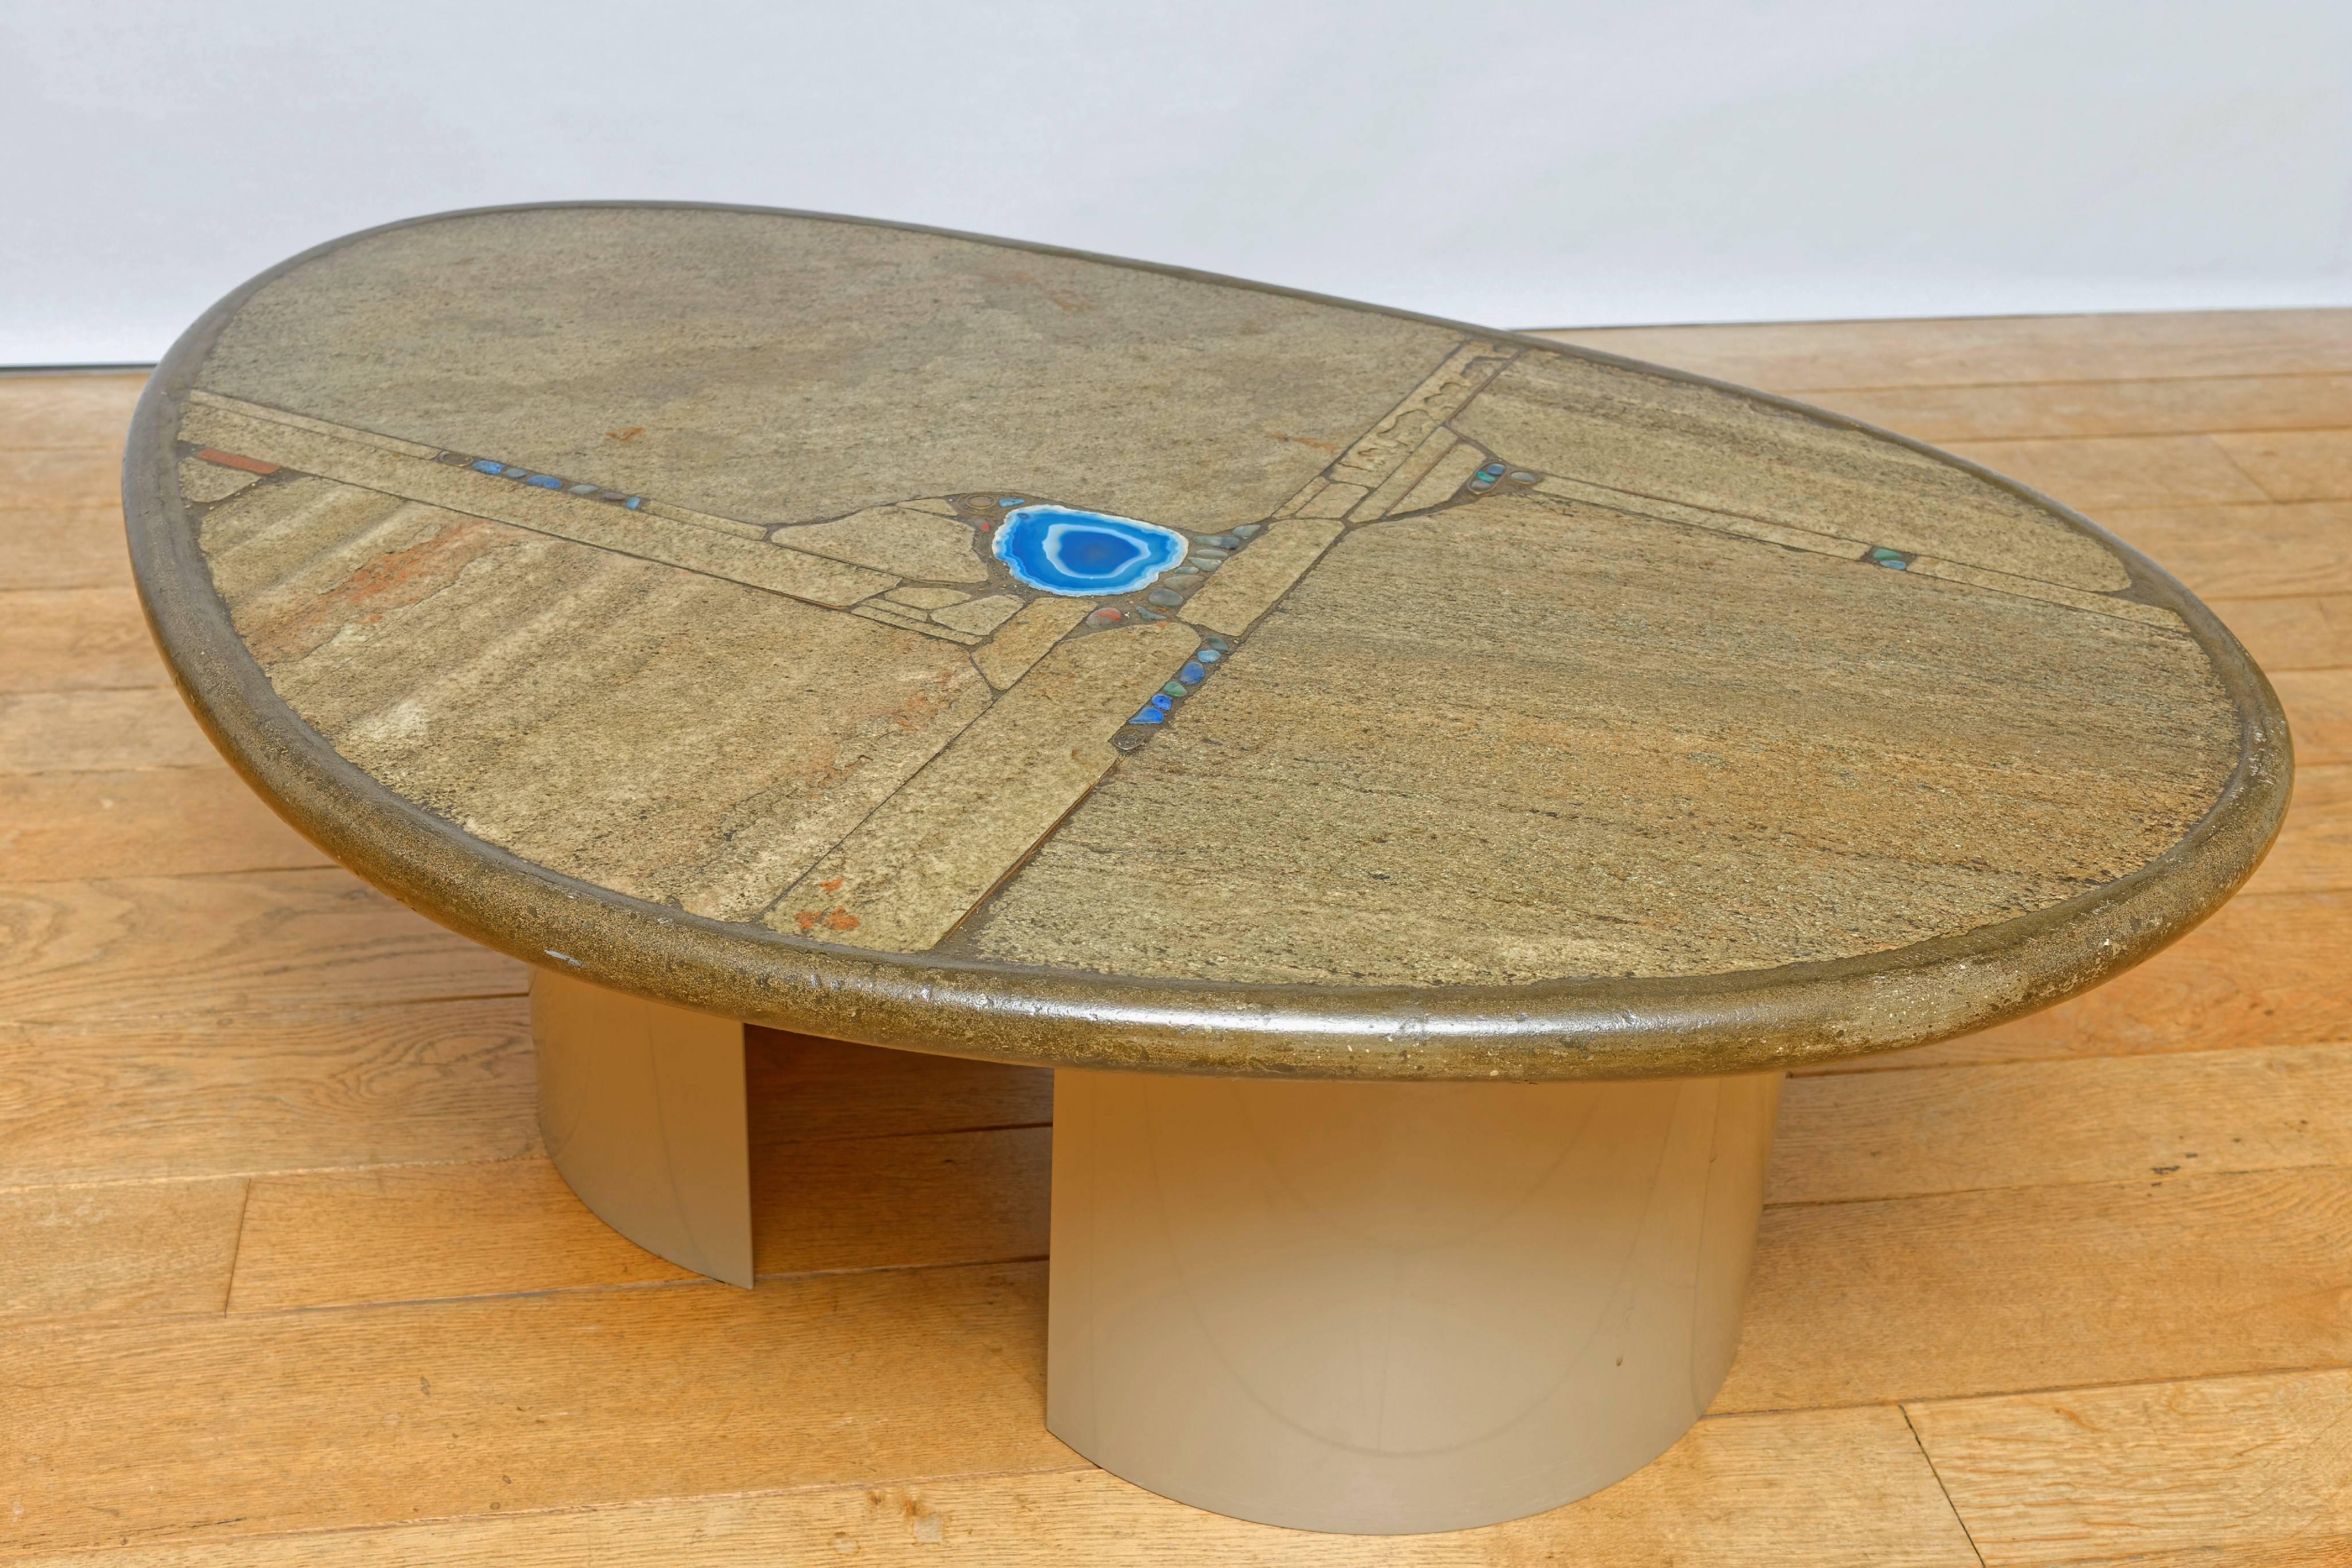 Rare one-off low table by the Dutch artist Paul Kingma (1931-2013).
Top made of natural stone with blue agates, brass and copper inlays, light glossy finish.
Semicircular feet in lacquered metal. Signed with the artist name and year (see last image).